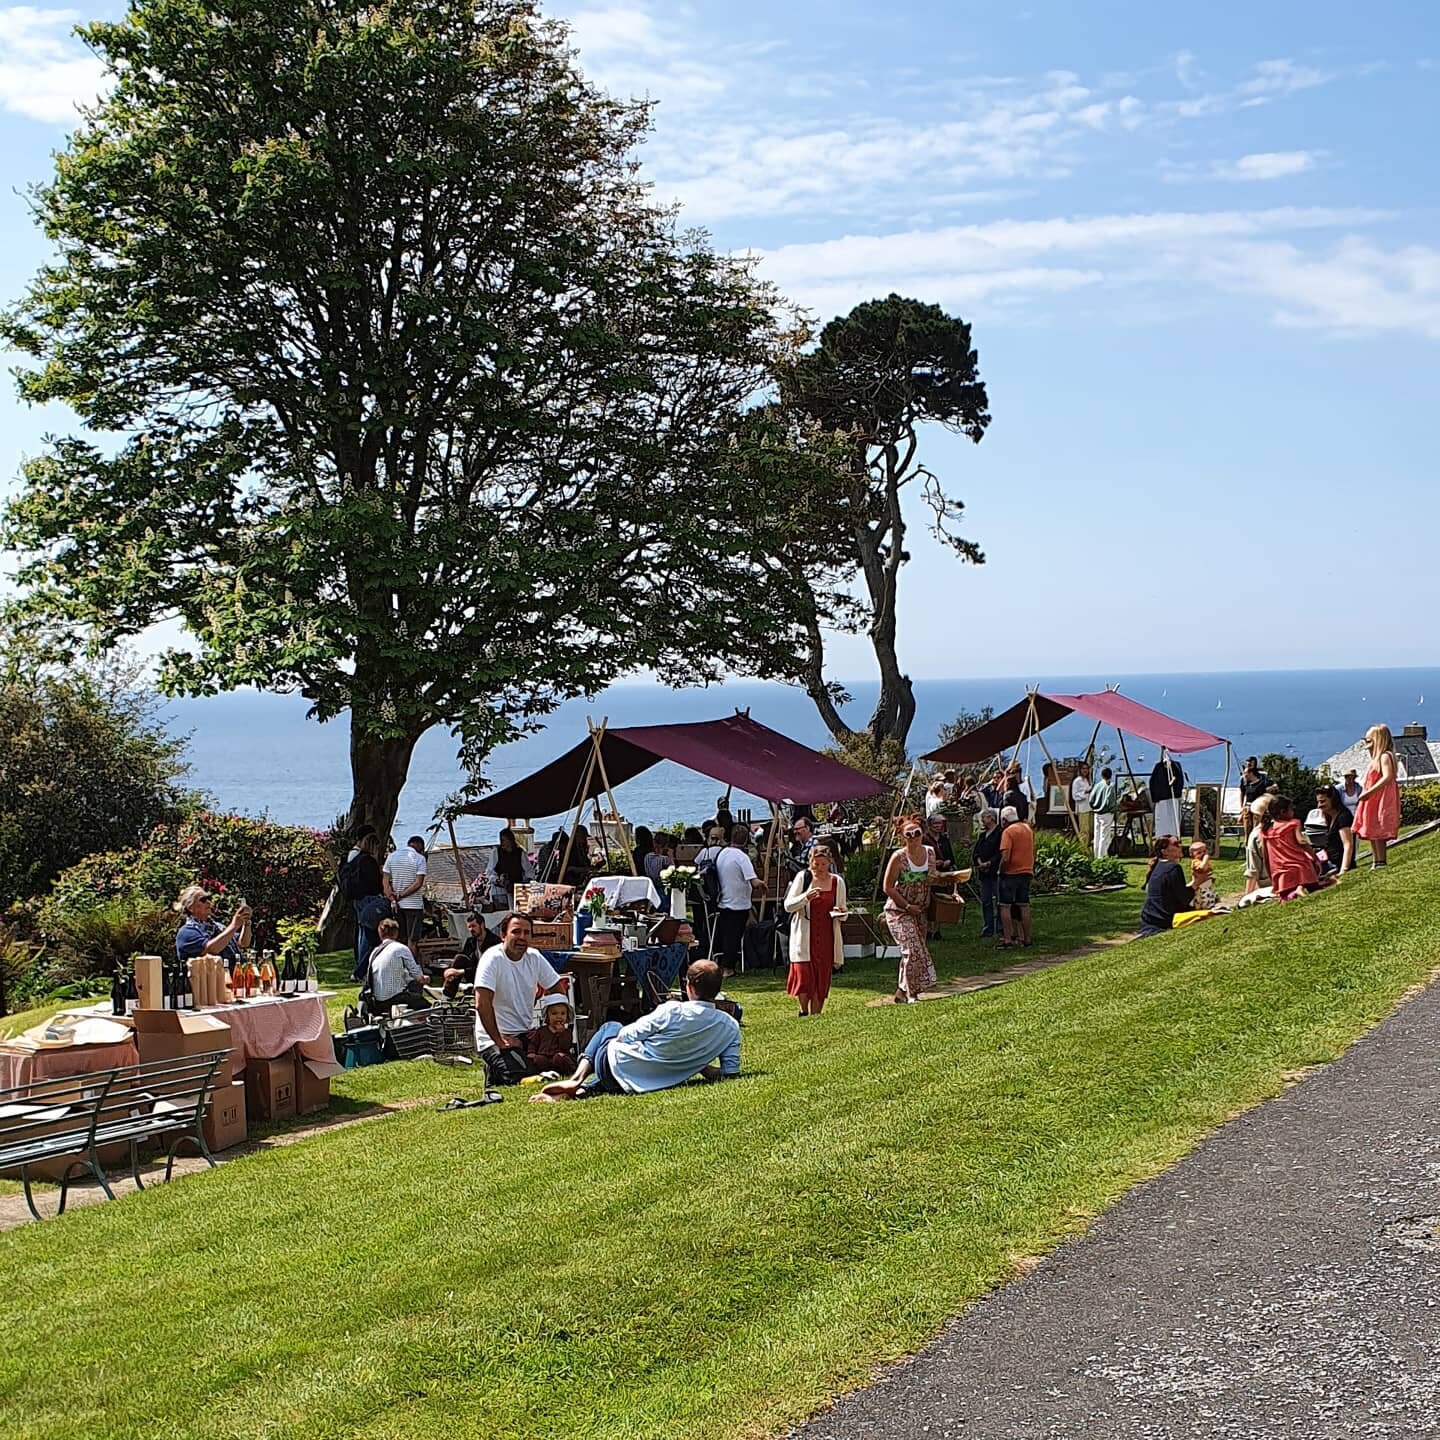 Great weather for the first @market_at_foweyhall

A lovely setting to browse some beautifully made and sourced products.